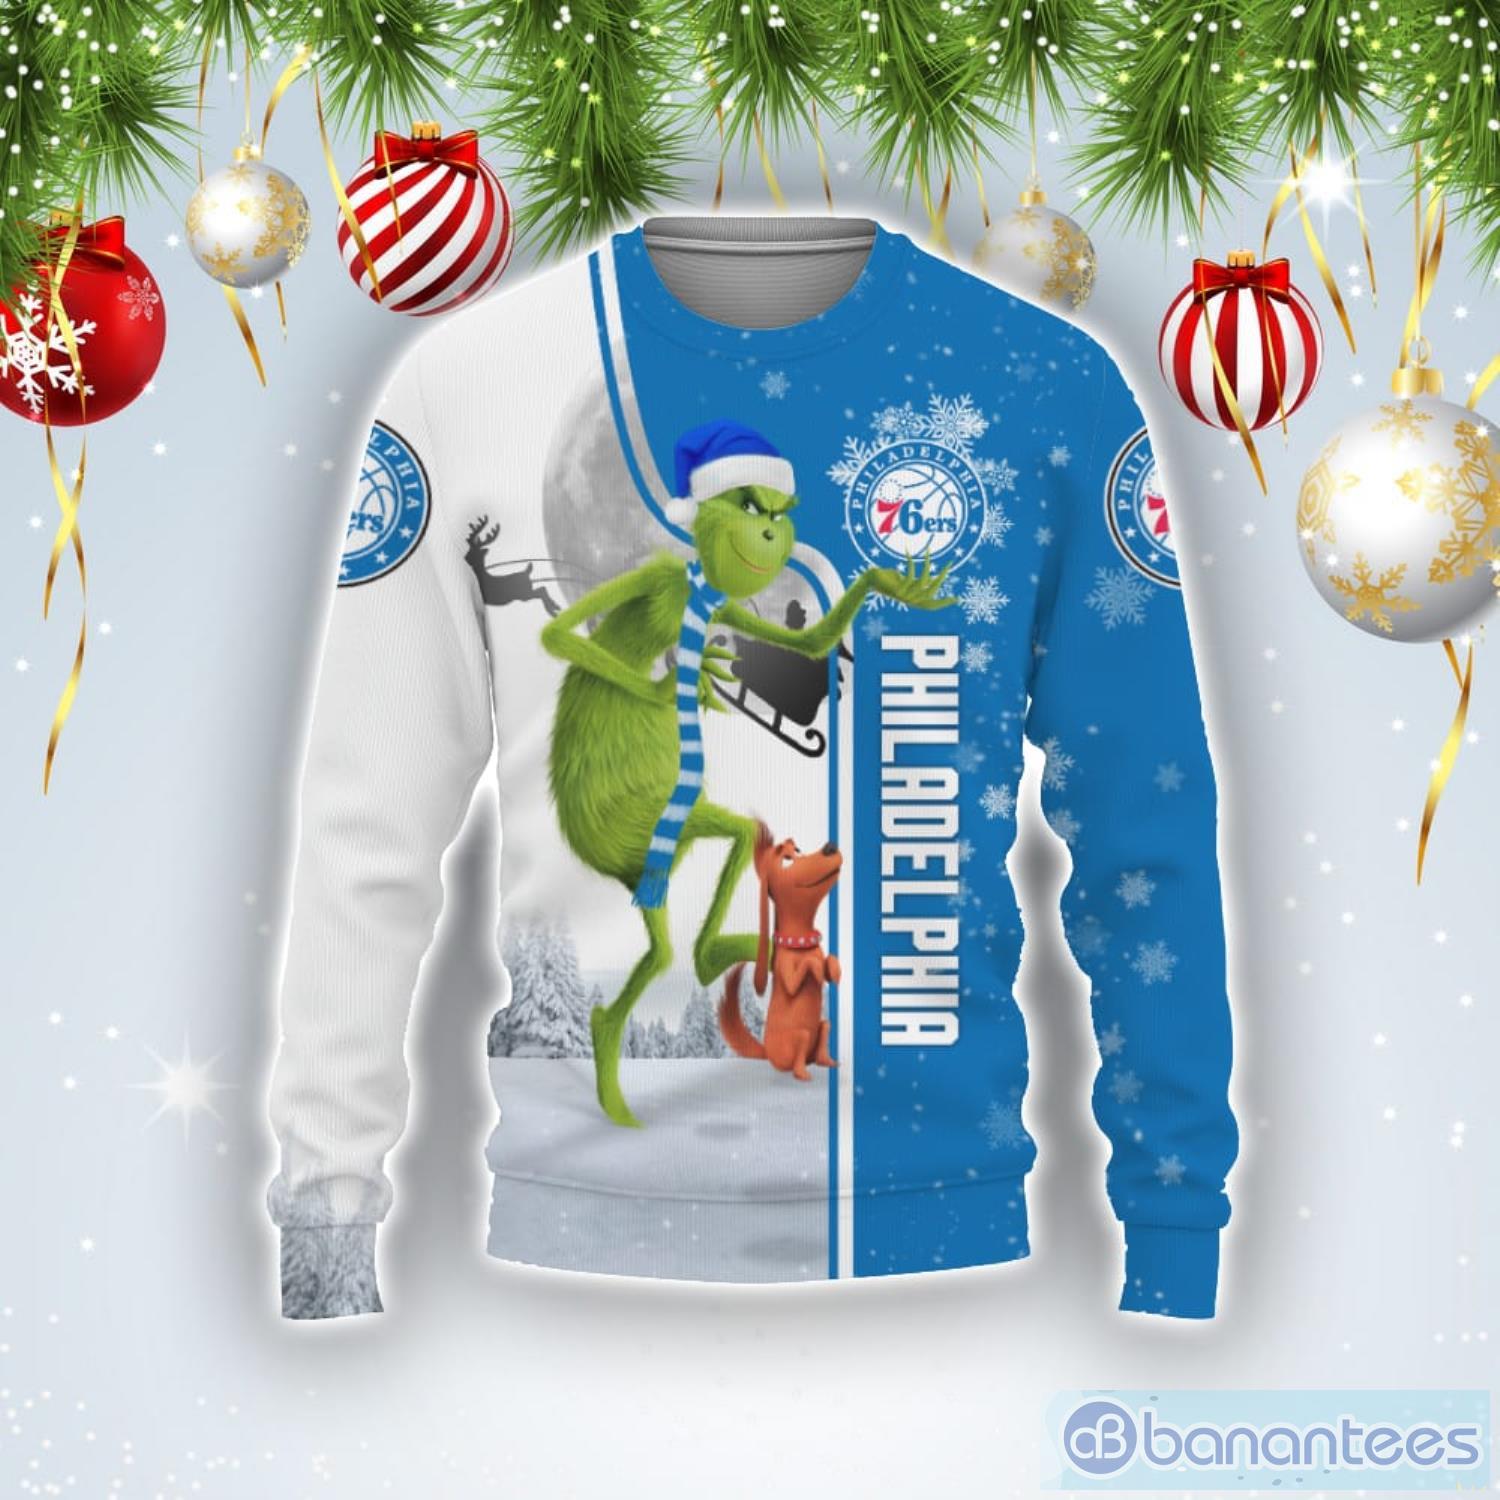 76ers ugly sweater